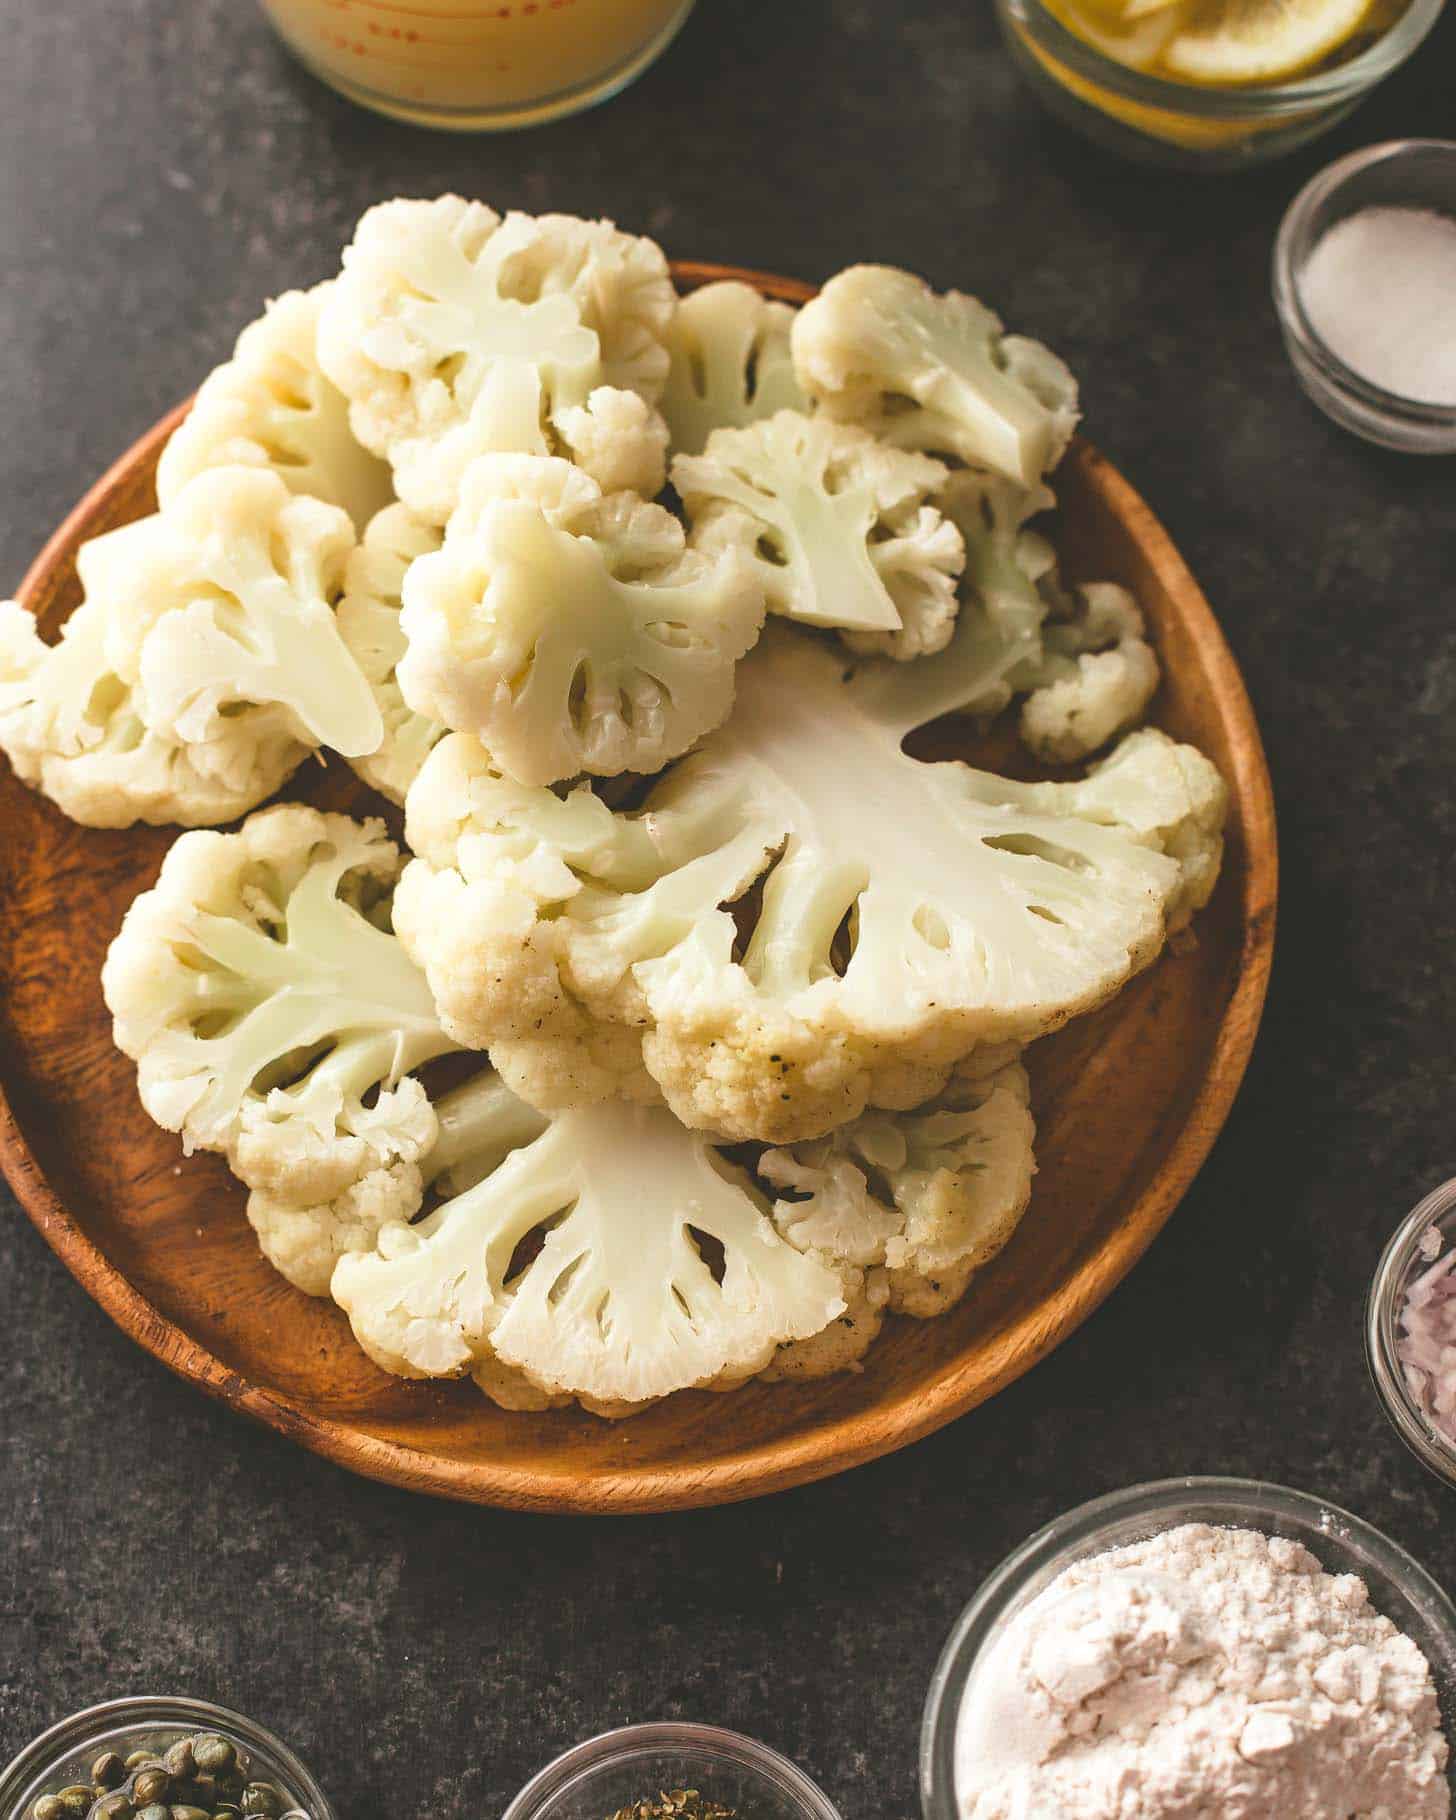 steamed cauliflower florets on a wooden tray